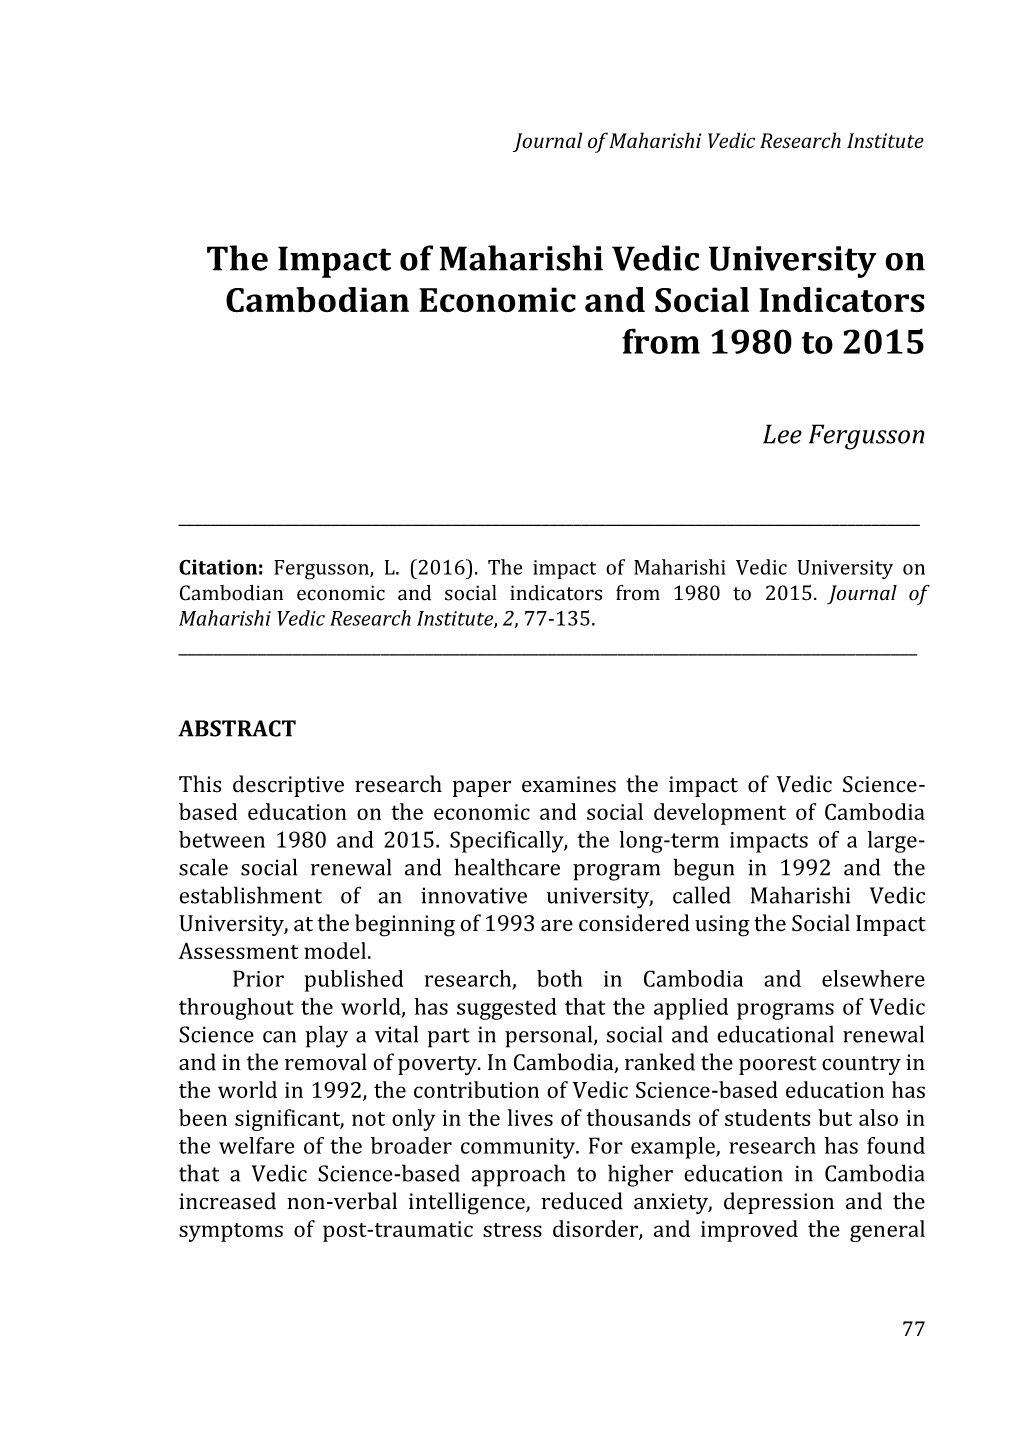 The Impact of Maharishi Vedic University on Cambodian Economic and Social Indicators from 1980 to 2015